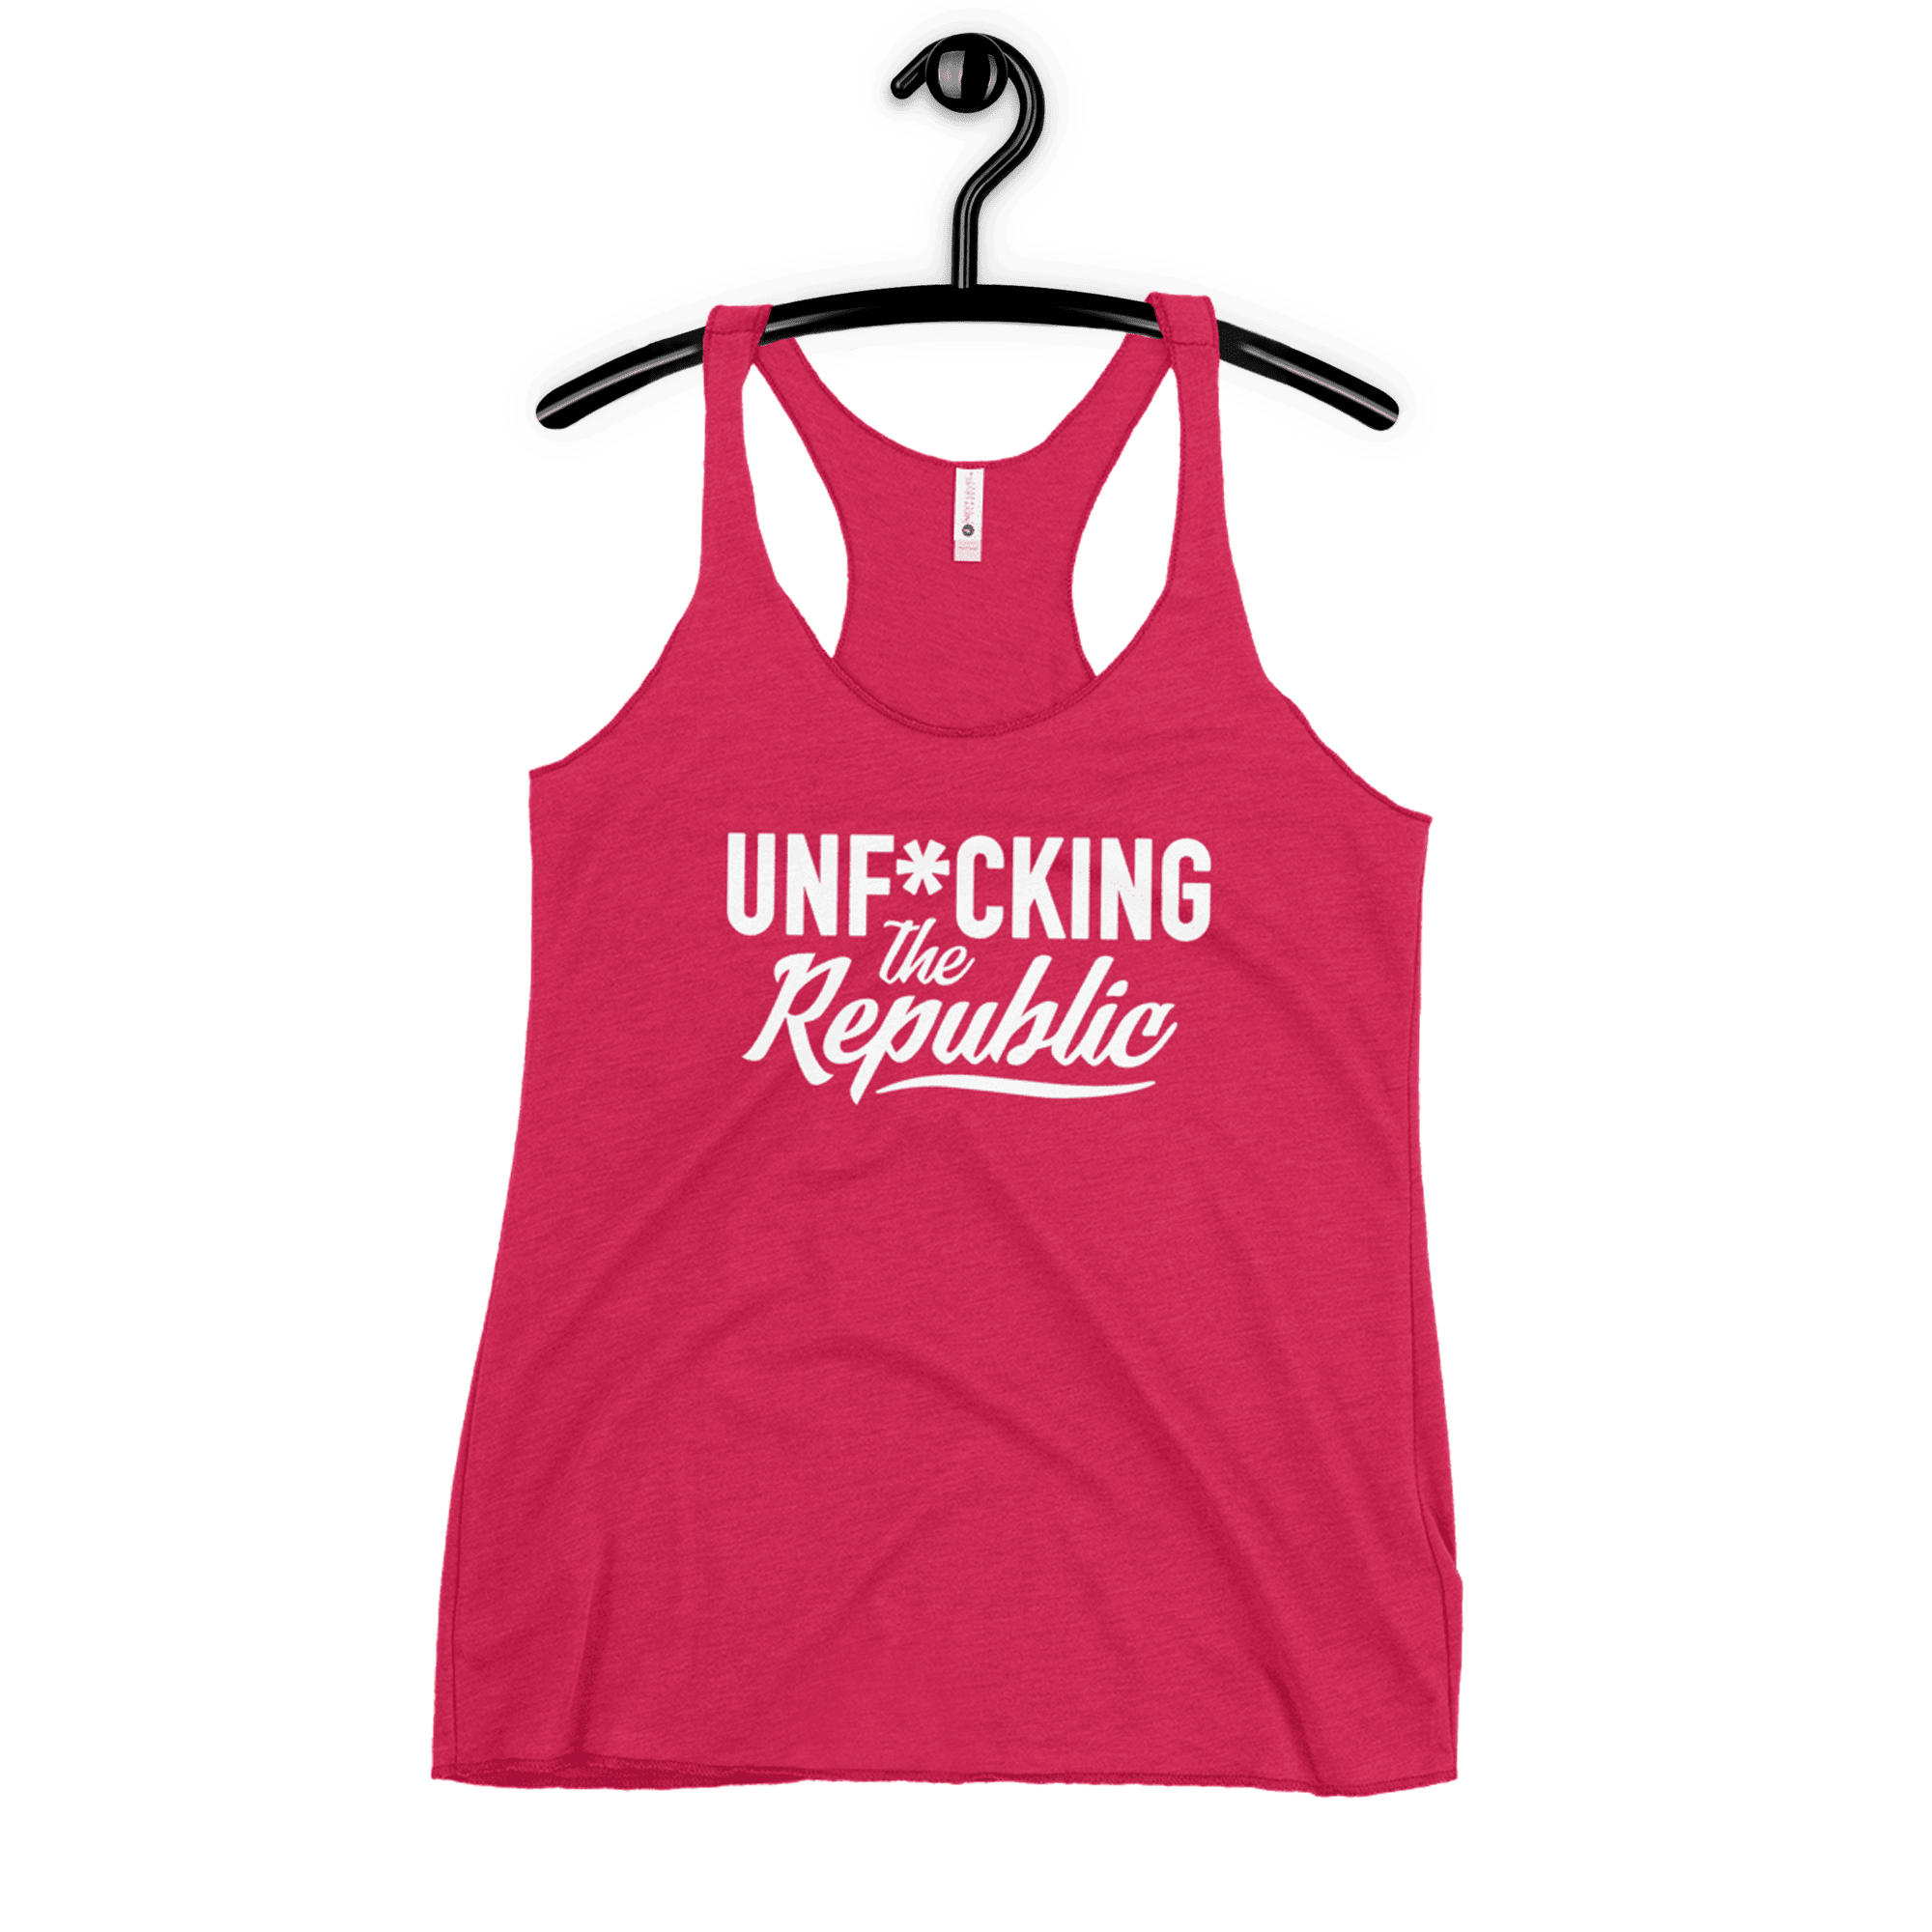 Fitted Tank top in bright pink with White Unf_cking The Republic logo on the chest